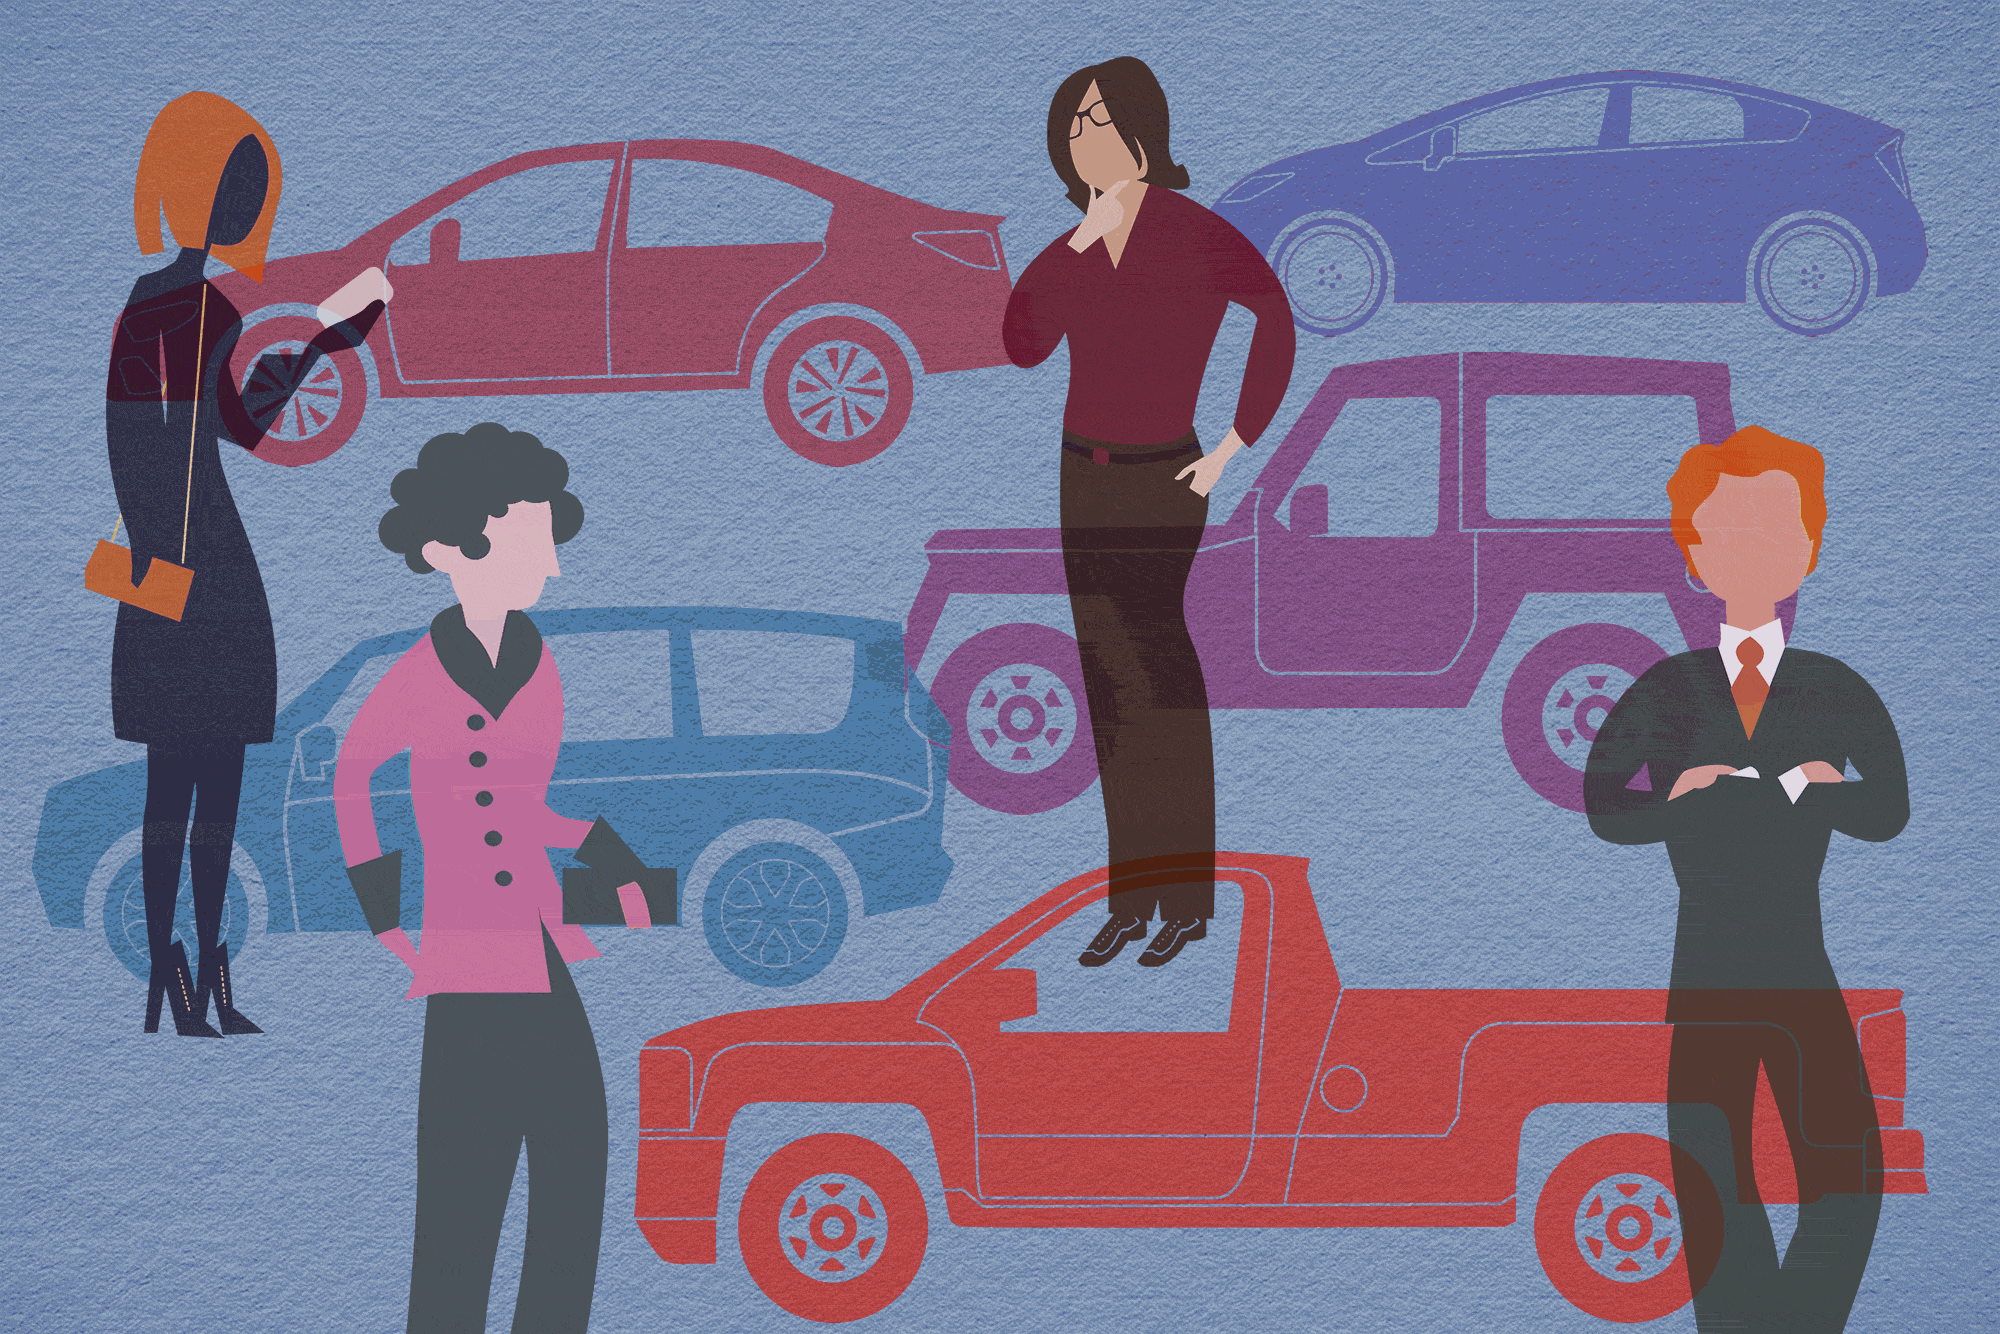 An illustration of people and cars